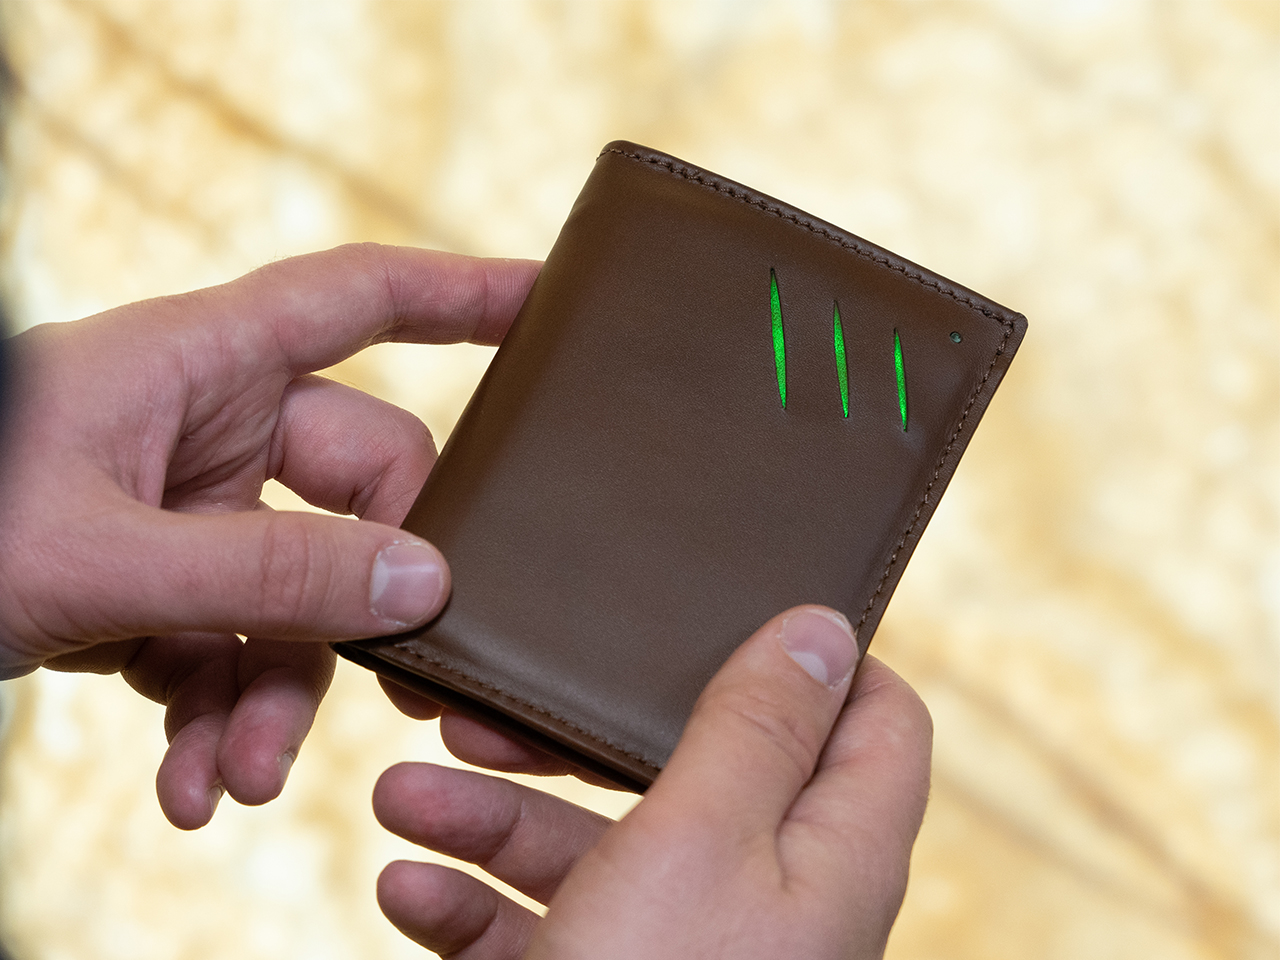 Walleon Smart Wallet Is Set For Indiegogo Launch On 2nd November 2021